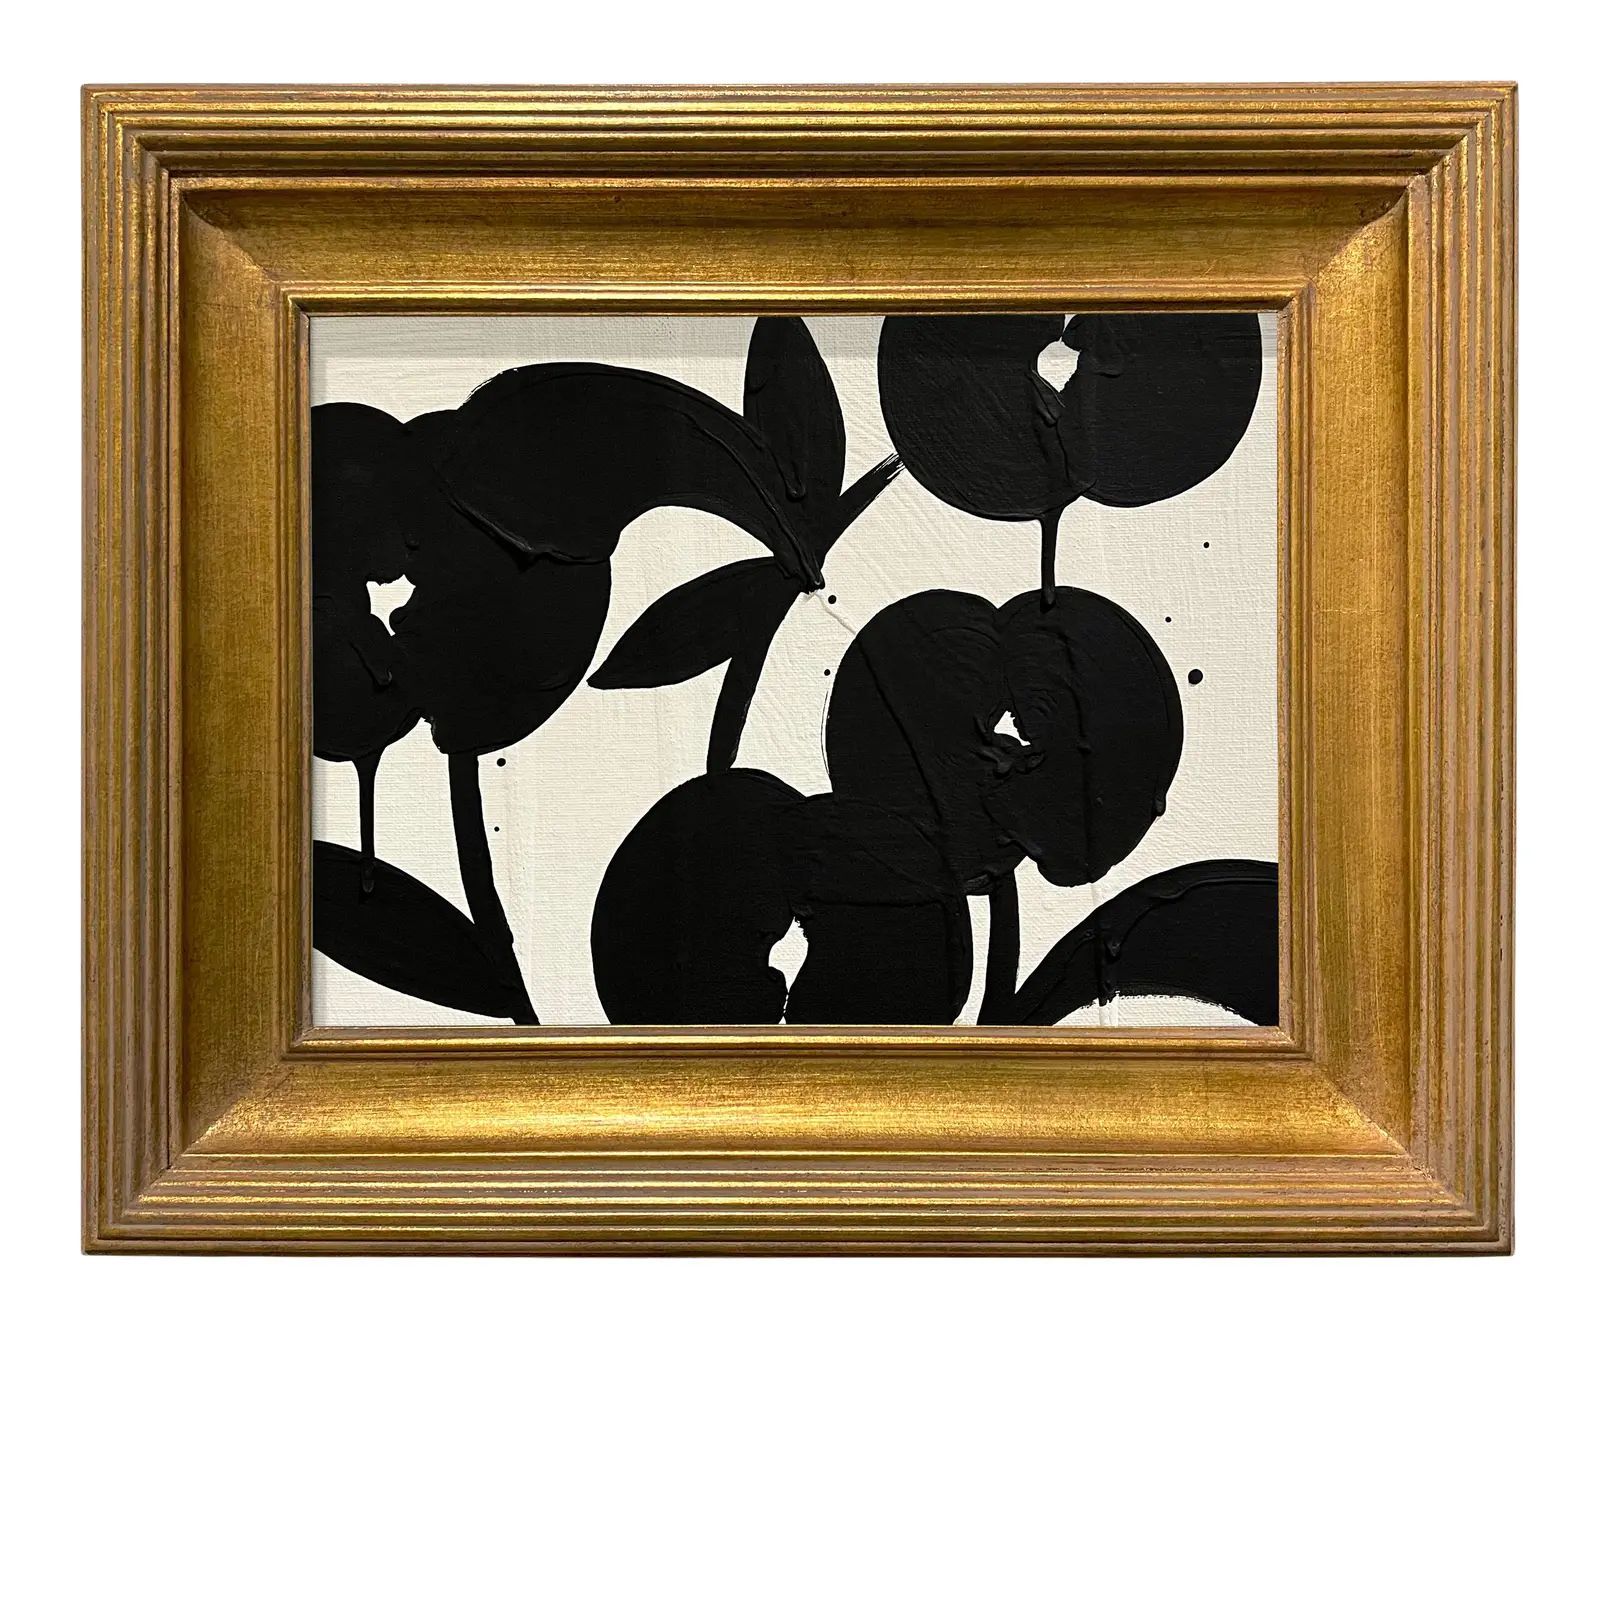 Ron Giusti Mini Abstract Orchid Cream and Black Acrylic Painting, Framed | Chairish